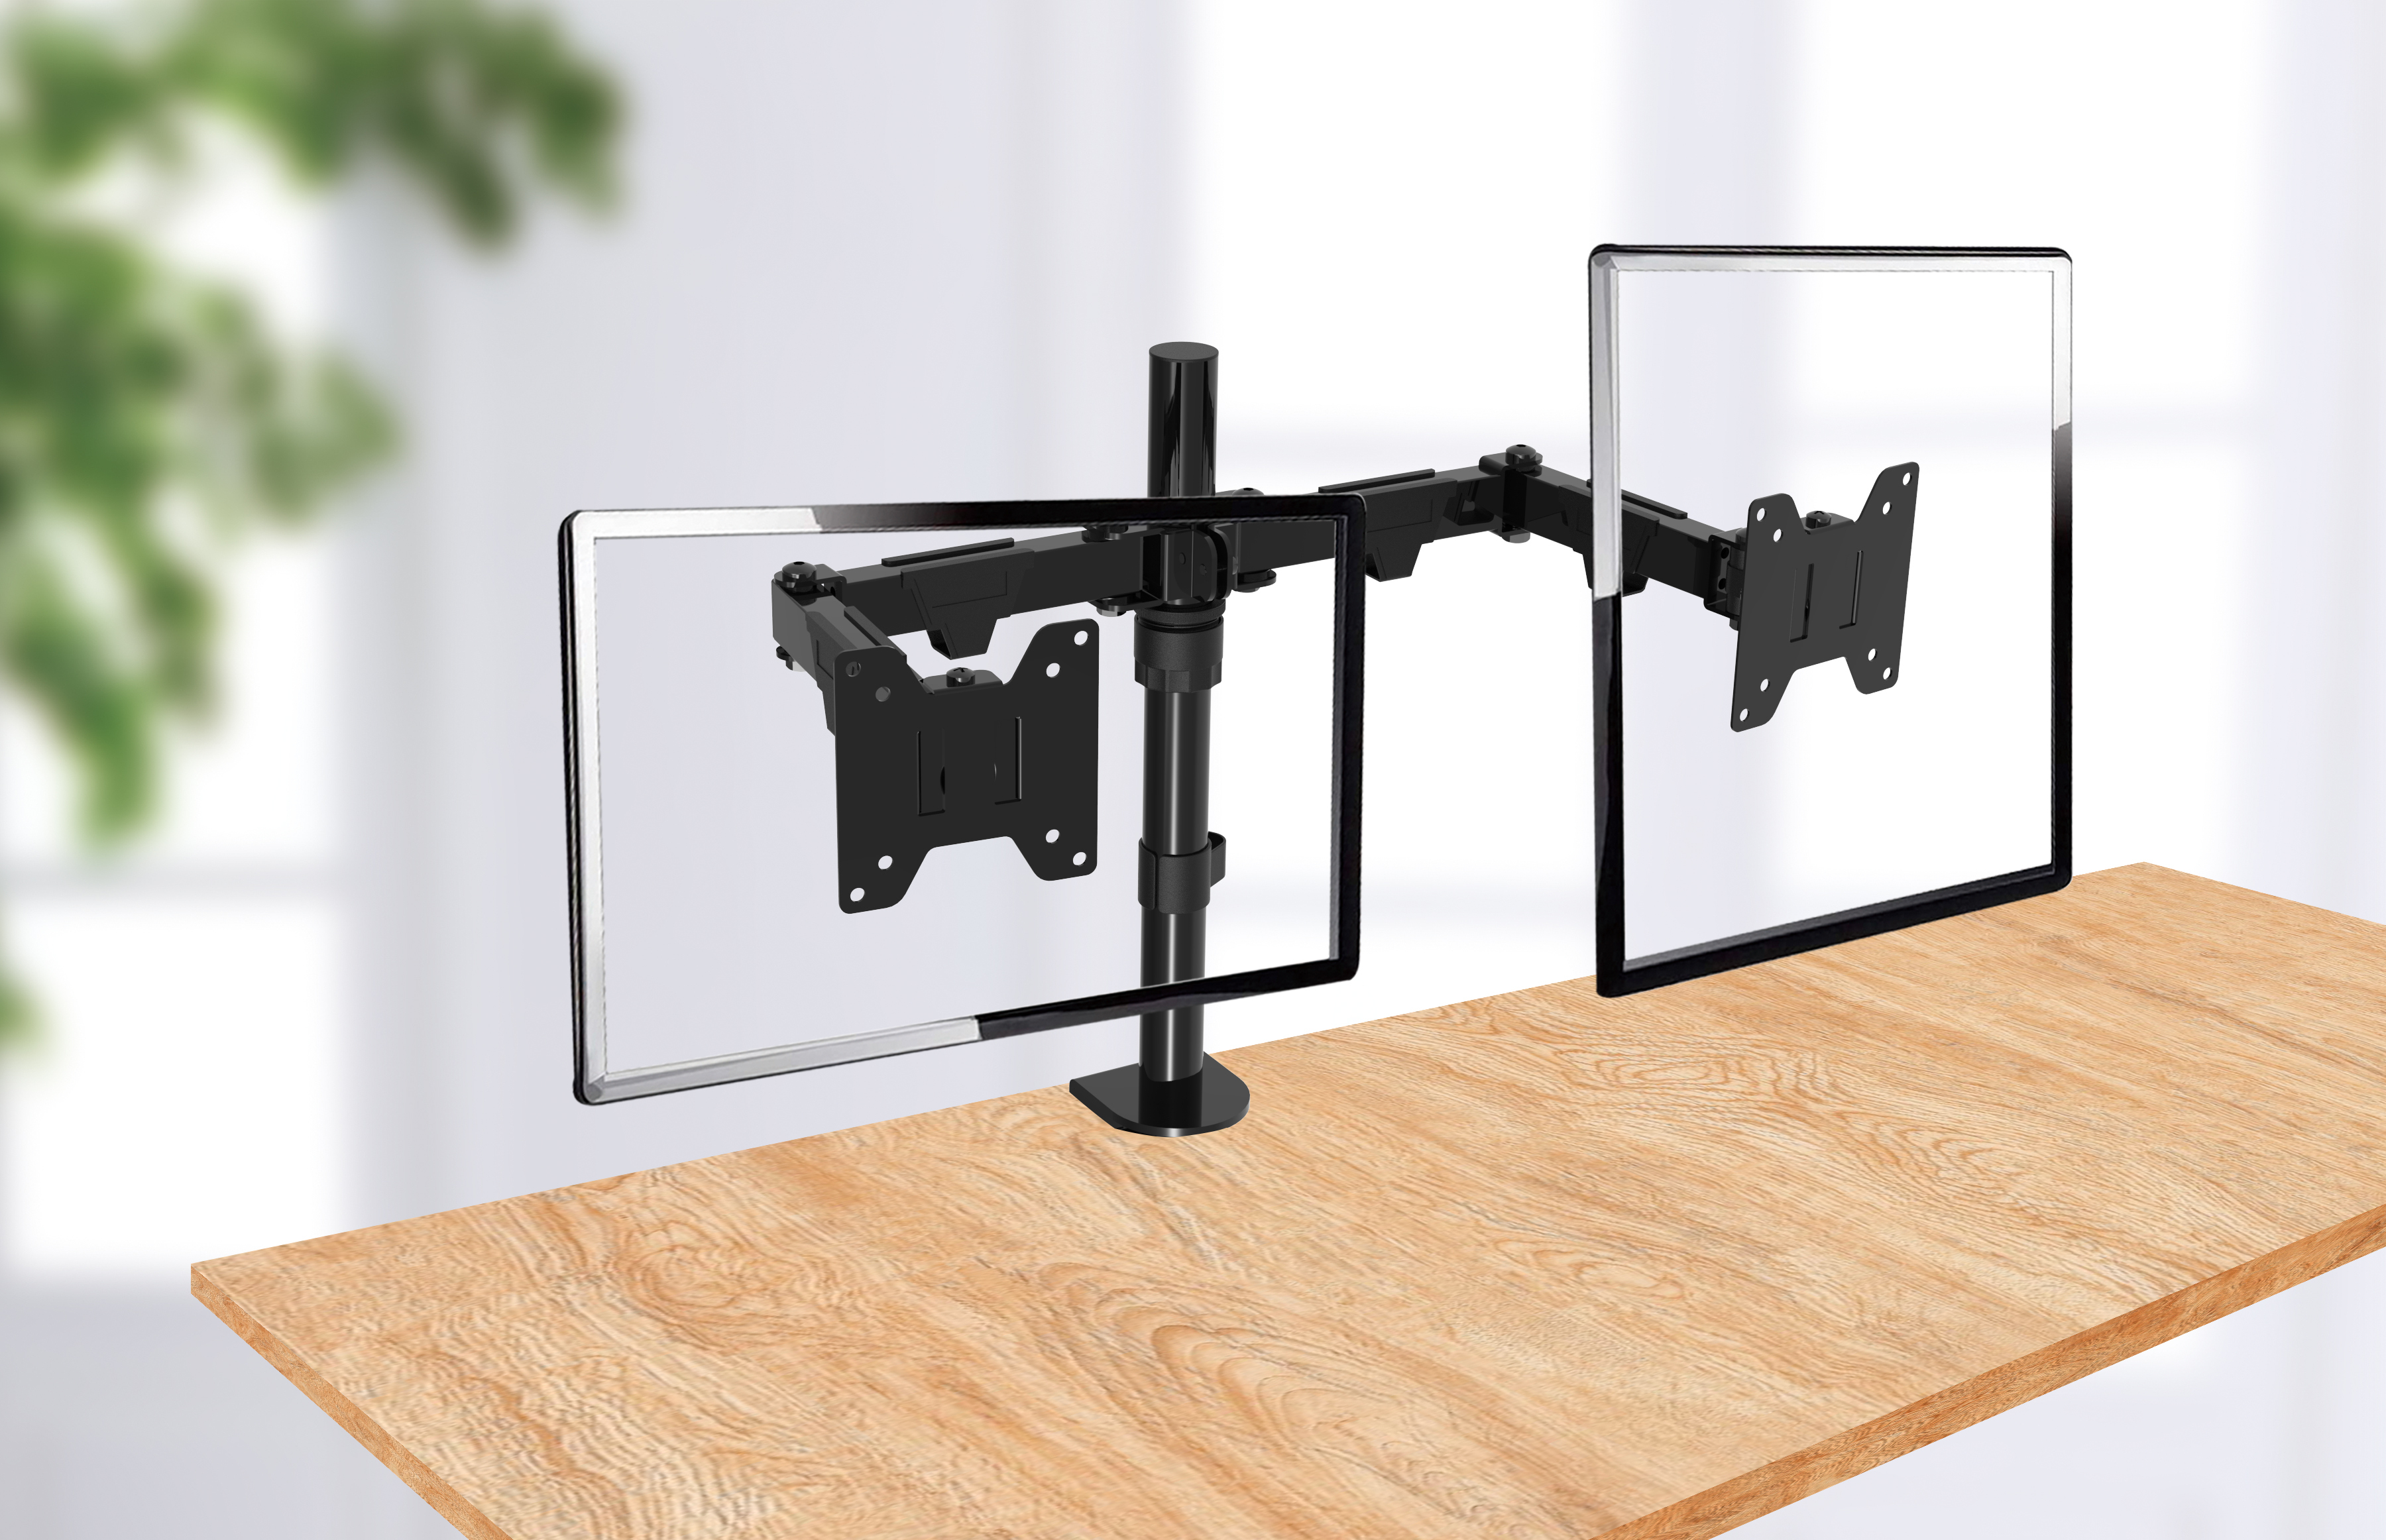 Simulated image of Cepter monitor mount attached to a table